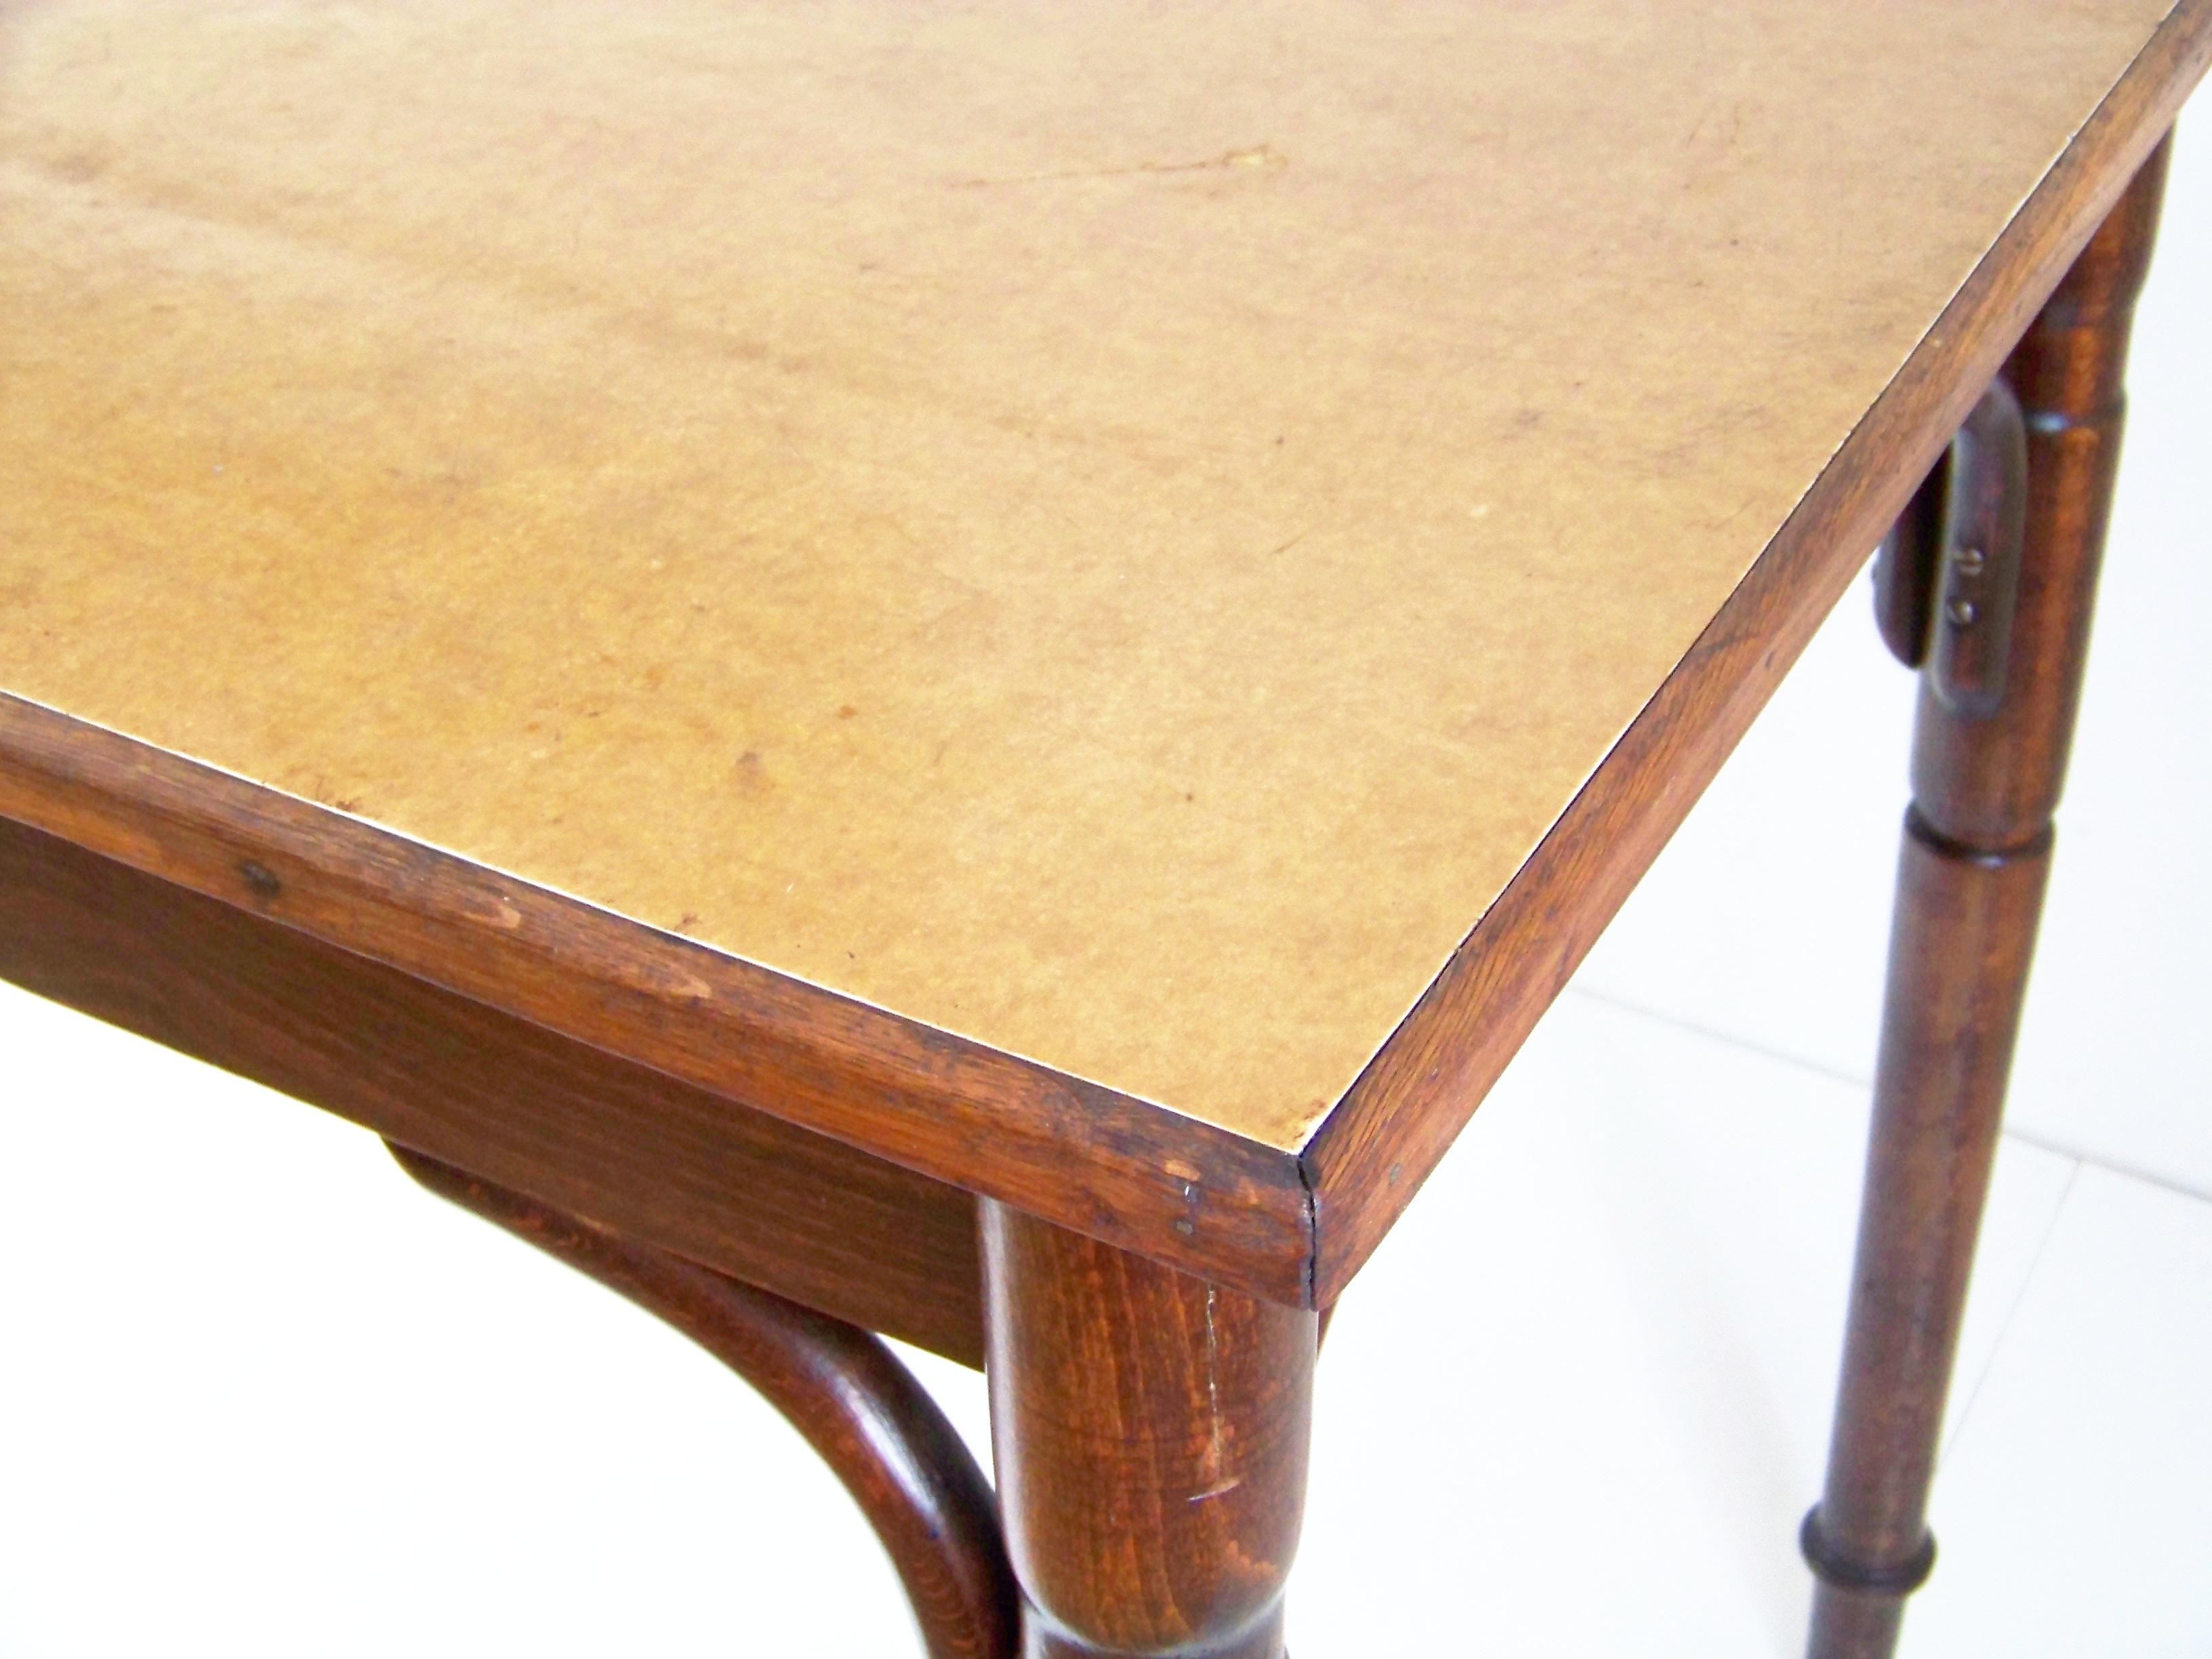 Austrian Dining Table Thonet from Pilsen Castle in Bohemia, circa 1920